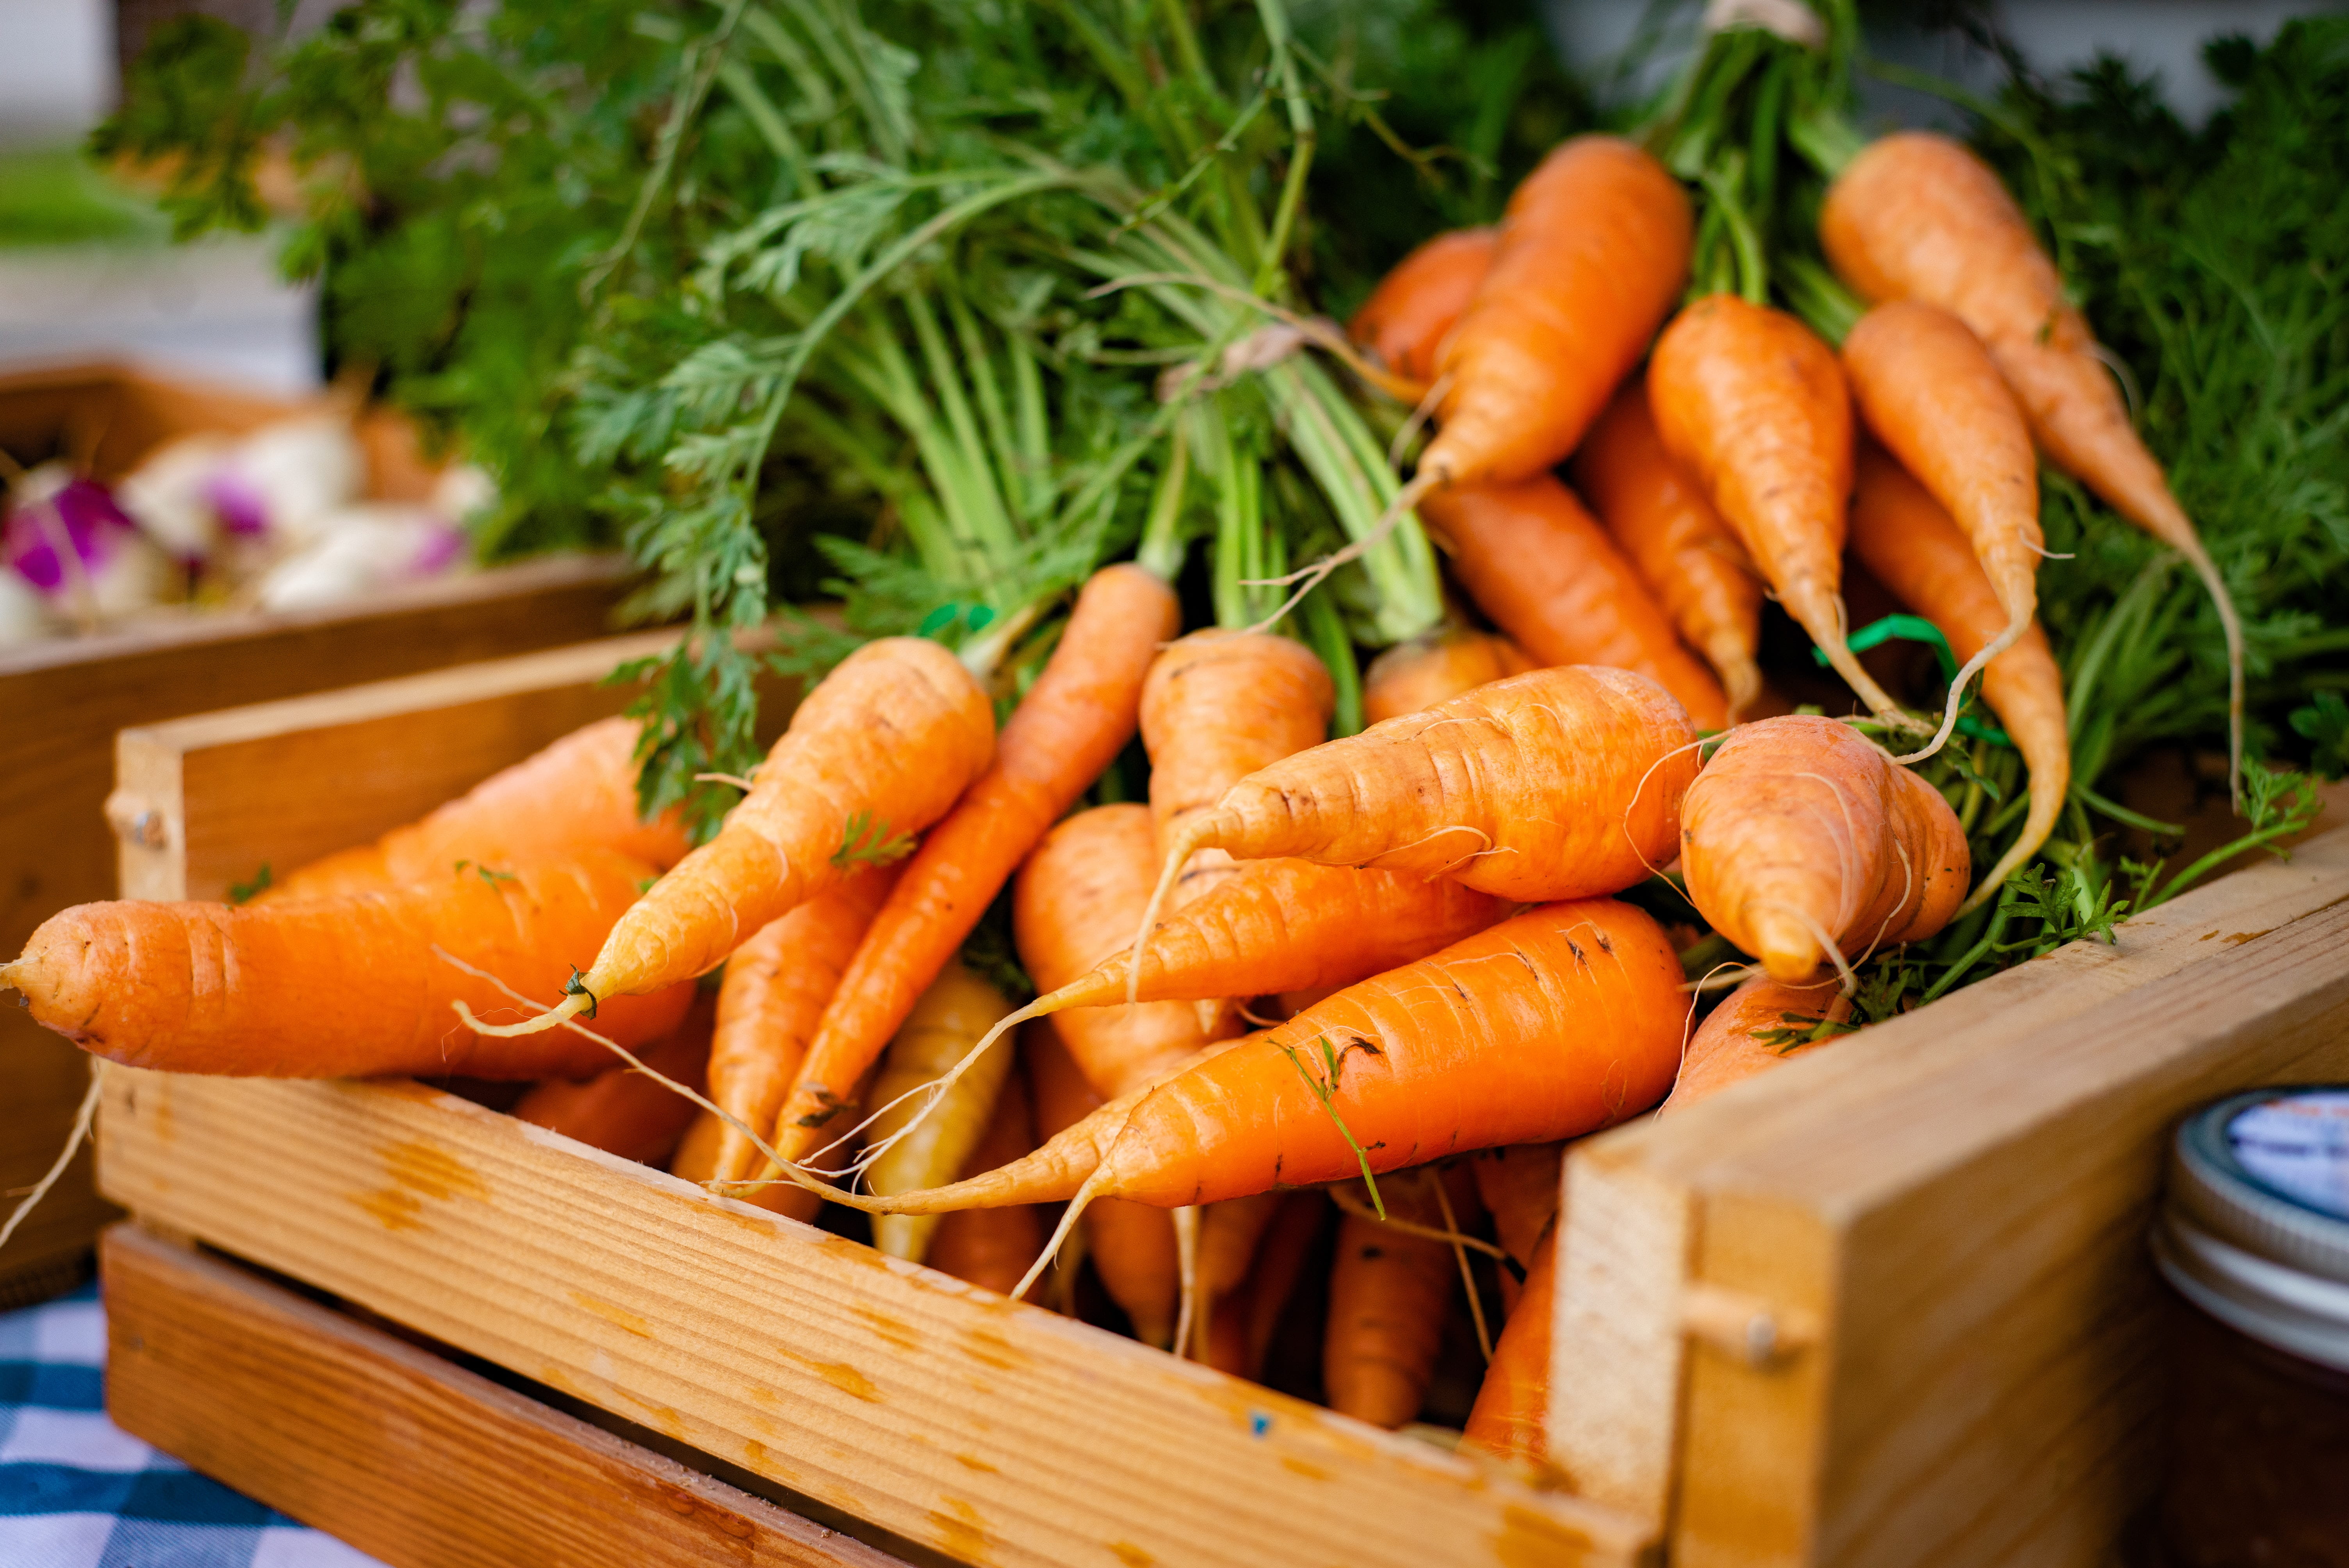 A wooden box filled with carrots.